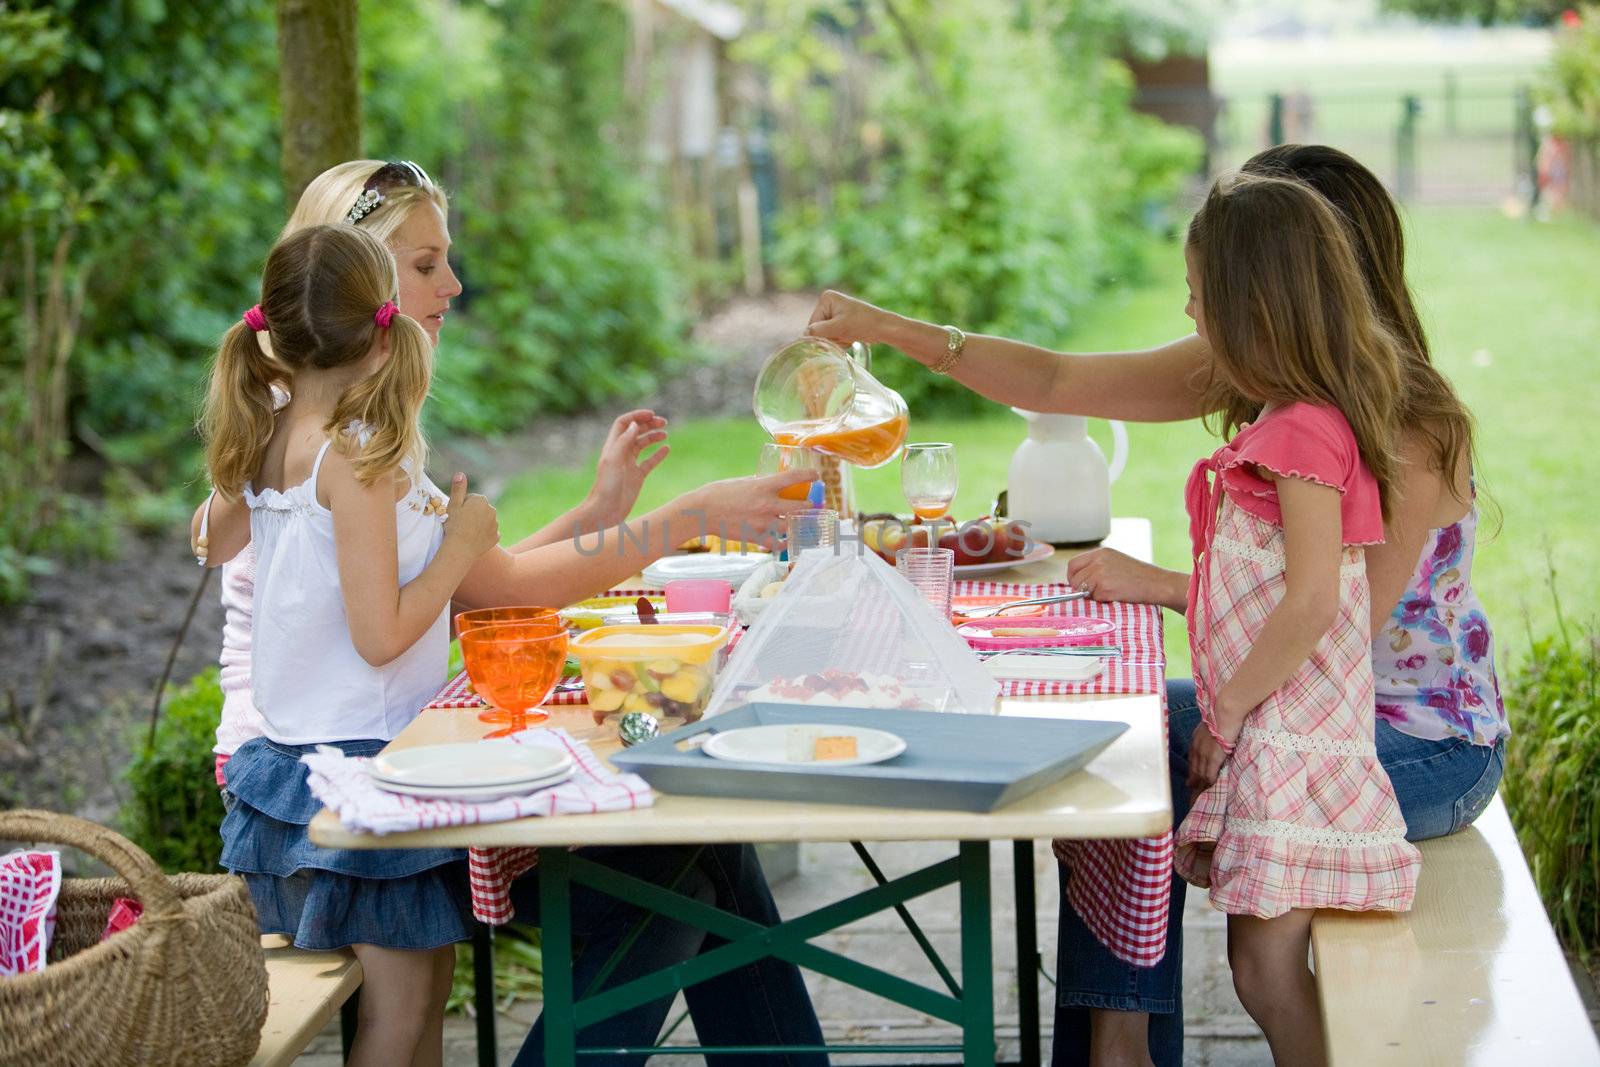 Two mothers with their daughters enjoying an outdoors picnic